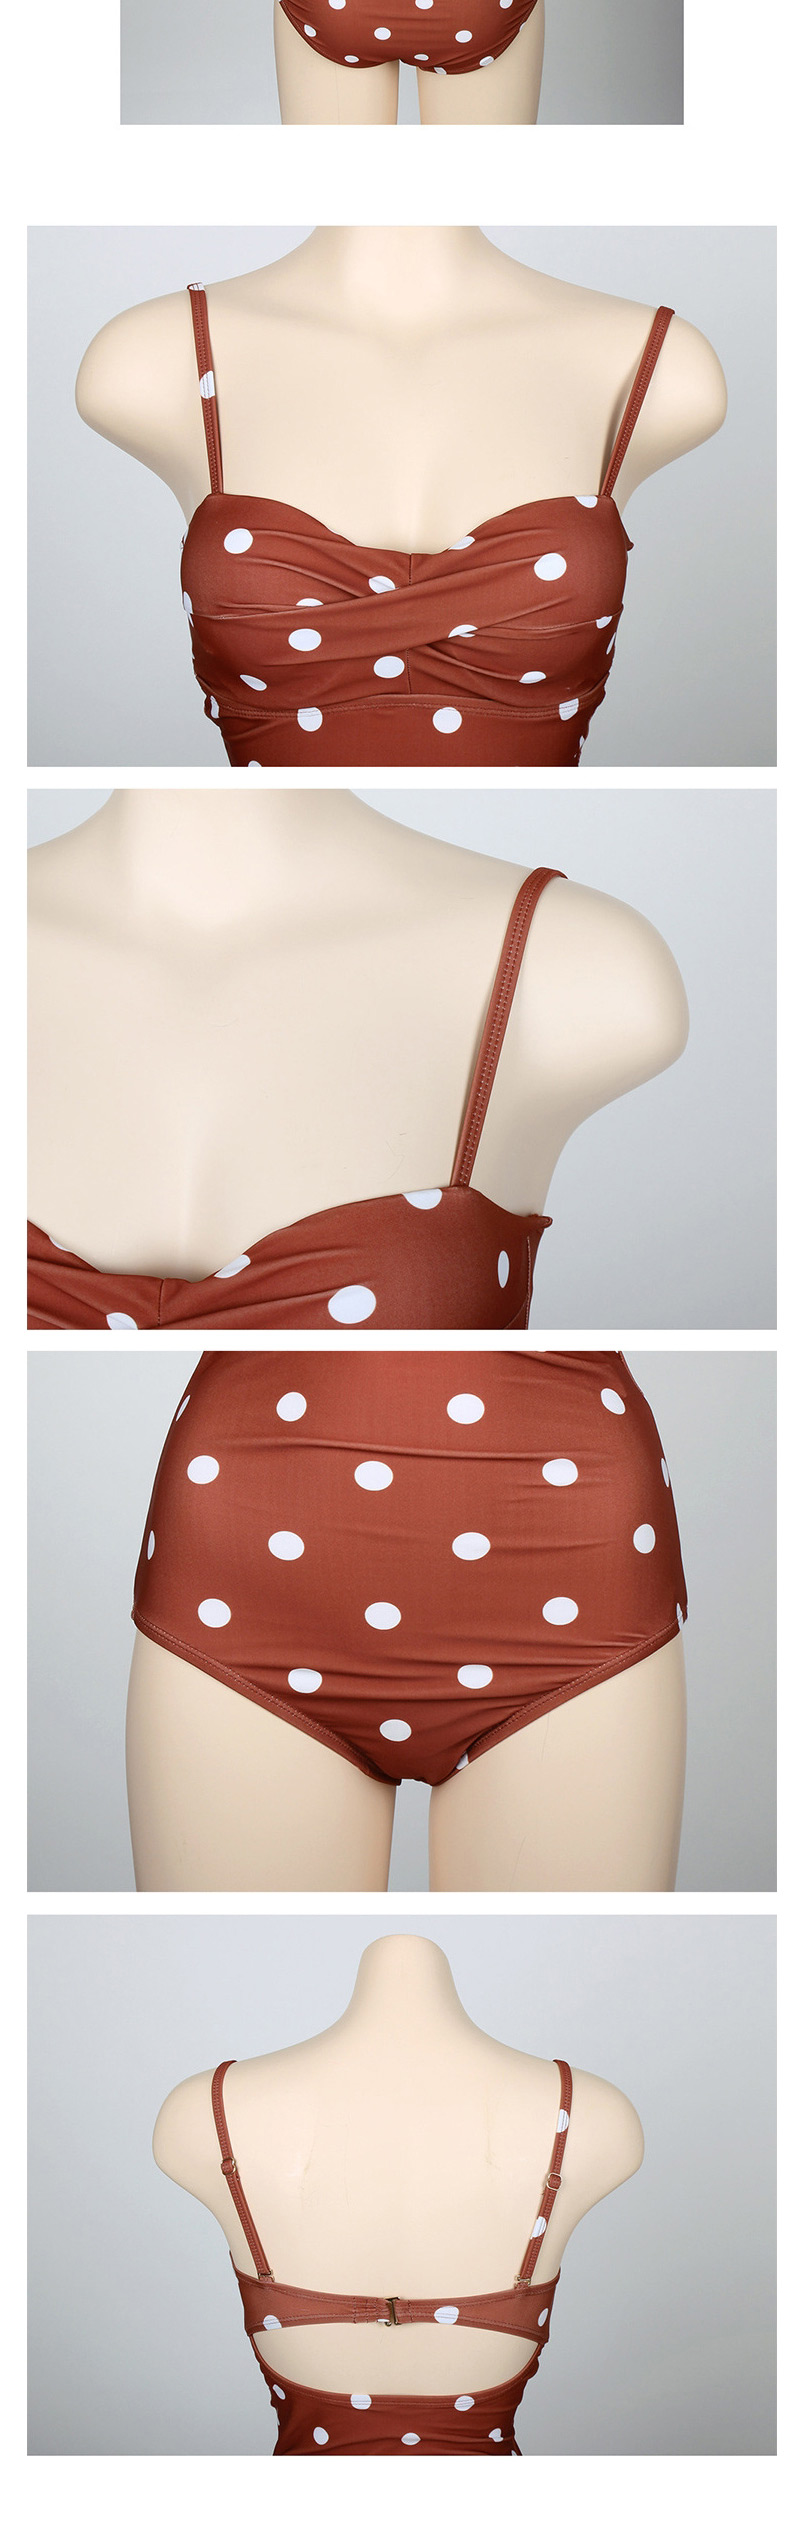 Fashion Printing Small Chest Underwire Gathered Polka Dot Print One-piece Swimsuit,One Pieces